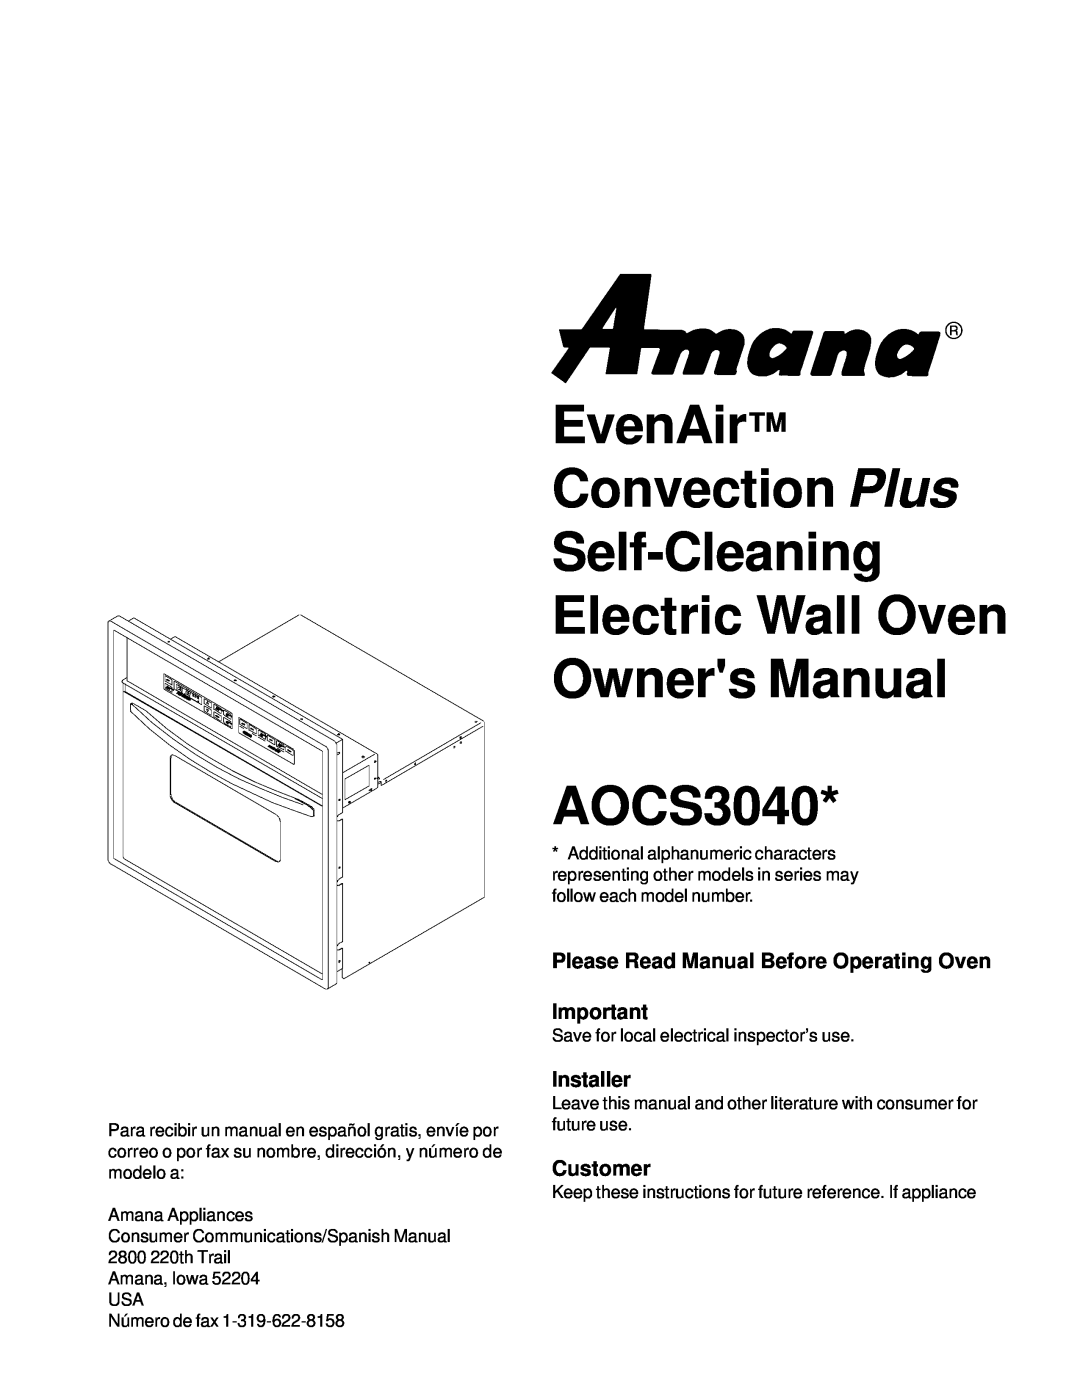 Amana AOCS3040 owner manual Please Read Manual Before Operating Oven, Installer, Customer 